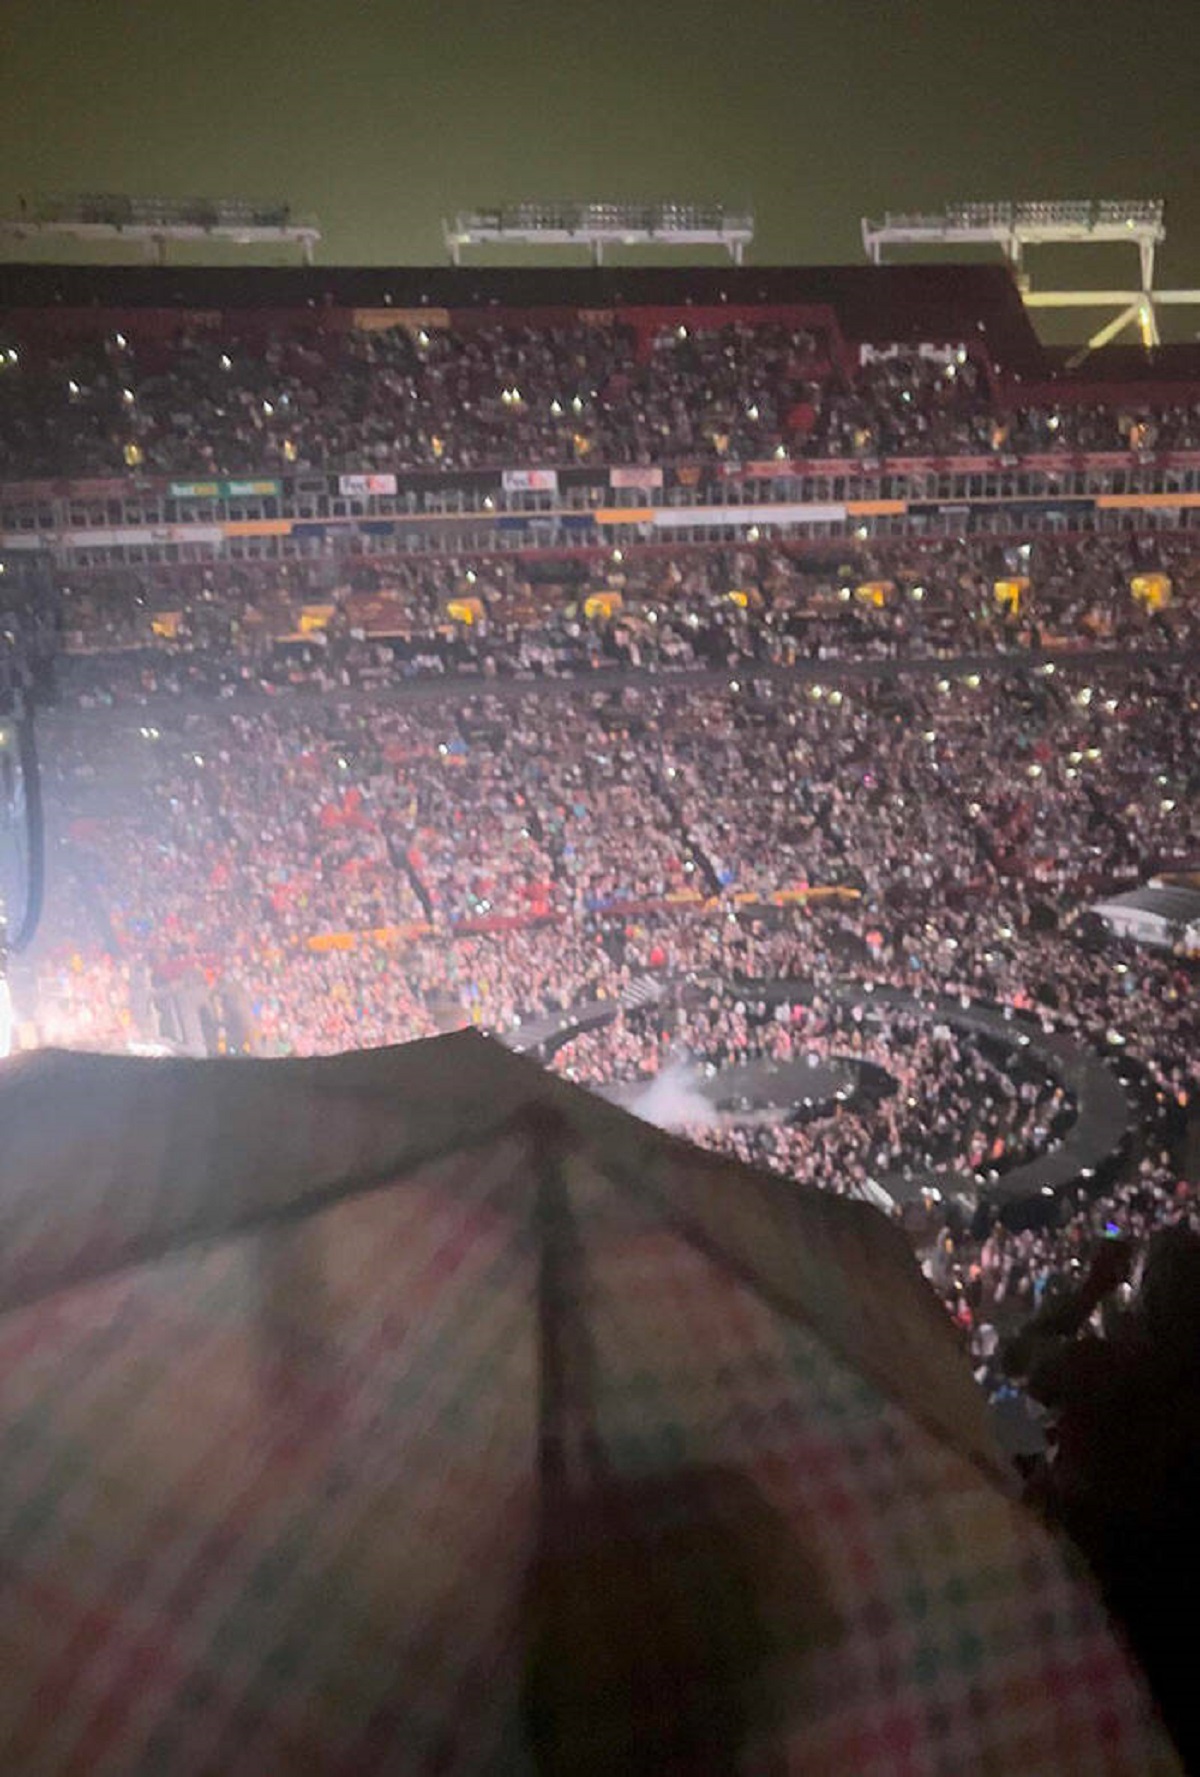 "Went To A Concert And Got The Umbrella View (Yes I Asked Her To Put It Away… She Did Not)"